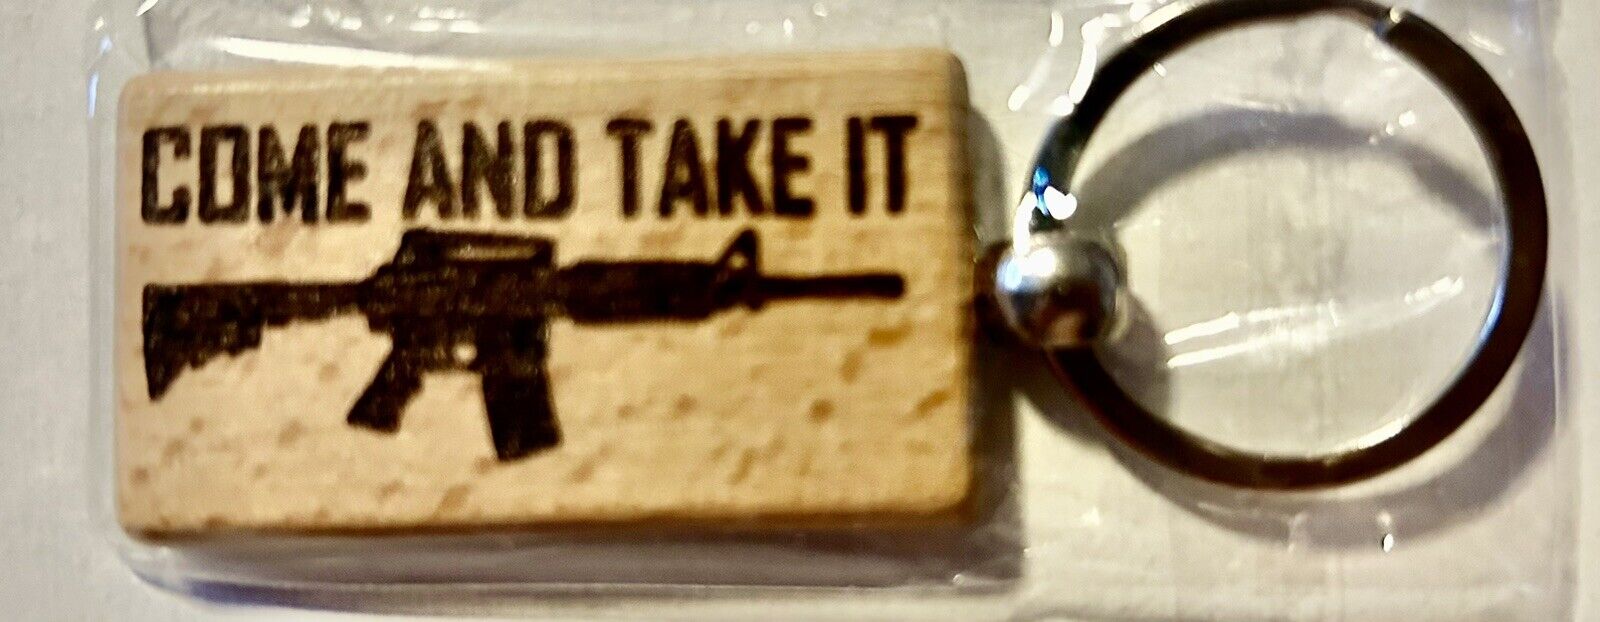 2nd Amendment “Come and Take It” Wooden Key Chain